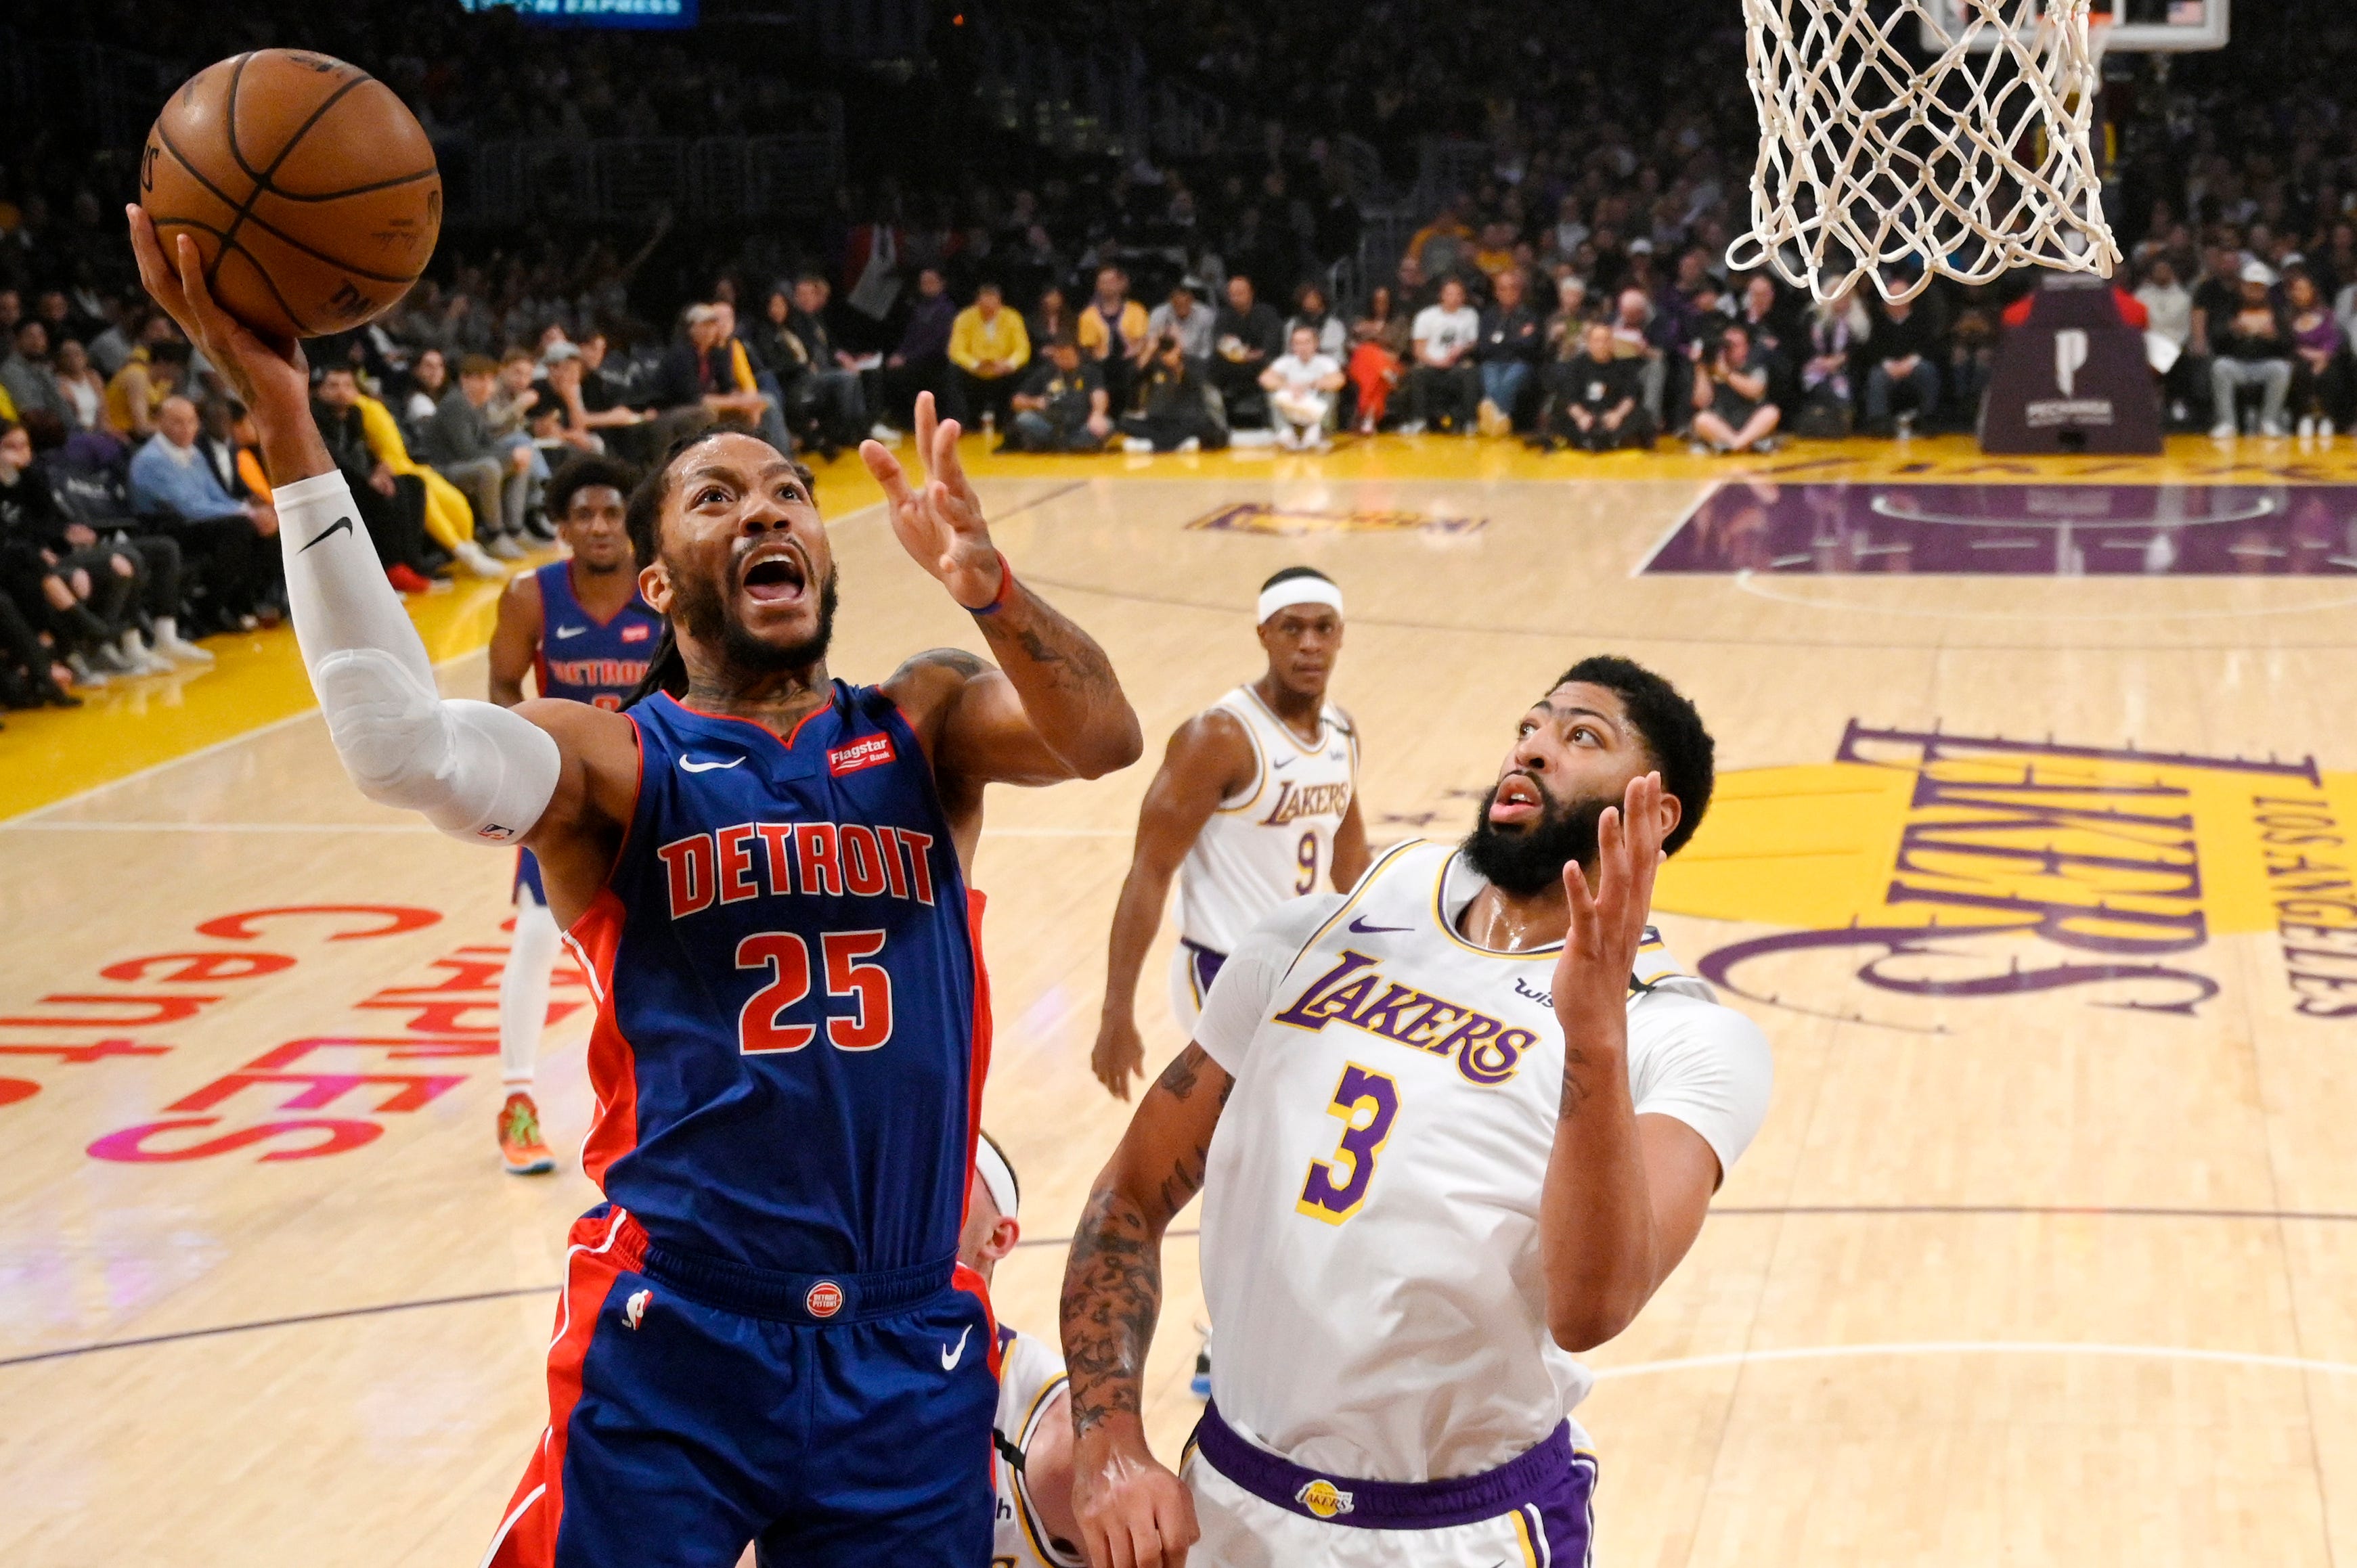 Detroit Pistons guard Derrick Rose, left, shoots as Los Angeles Lakers forward Anthony Davis defends during the first half of an NBA basketball game Sunday, Jan. 5, 2020, in Los Angeles.